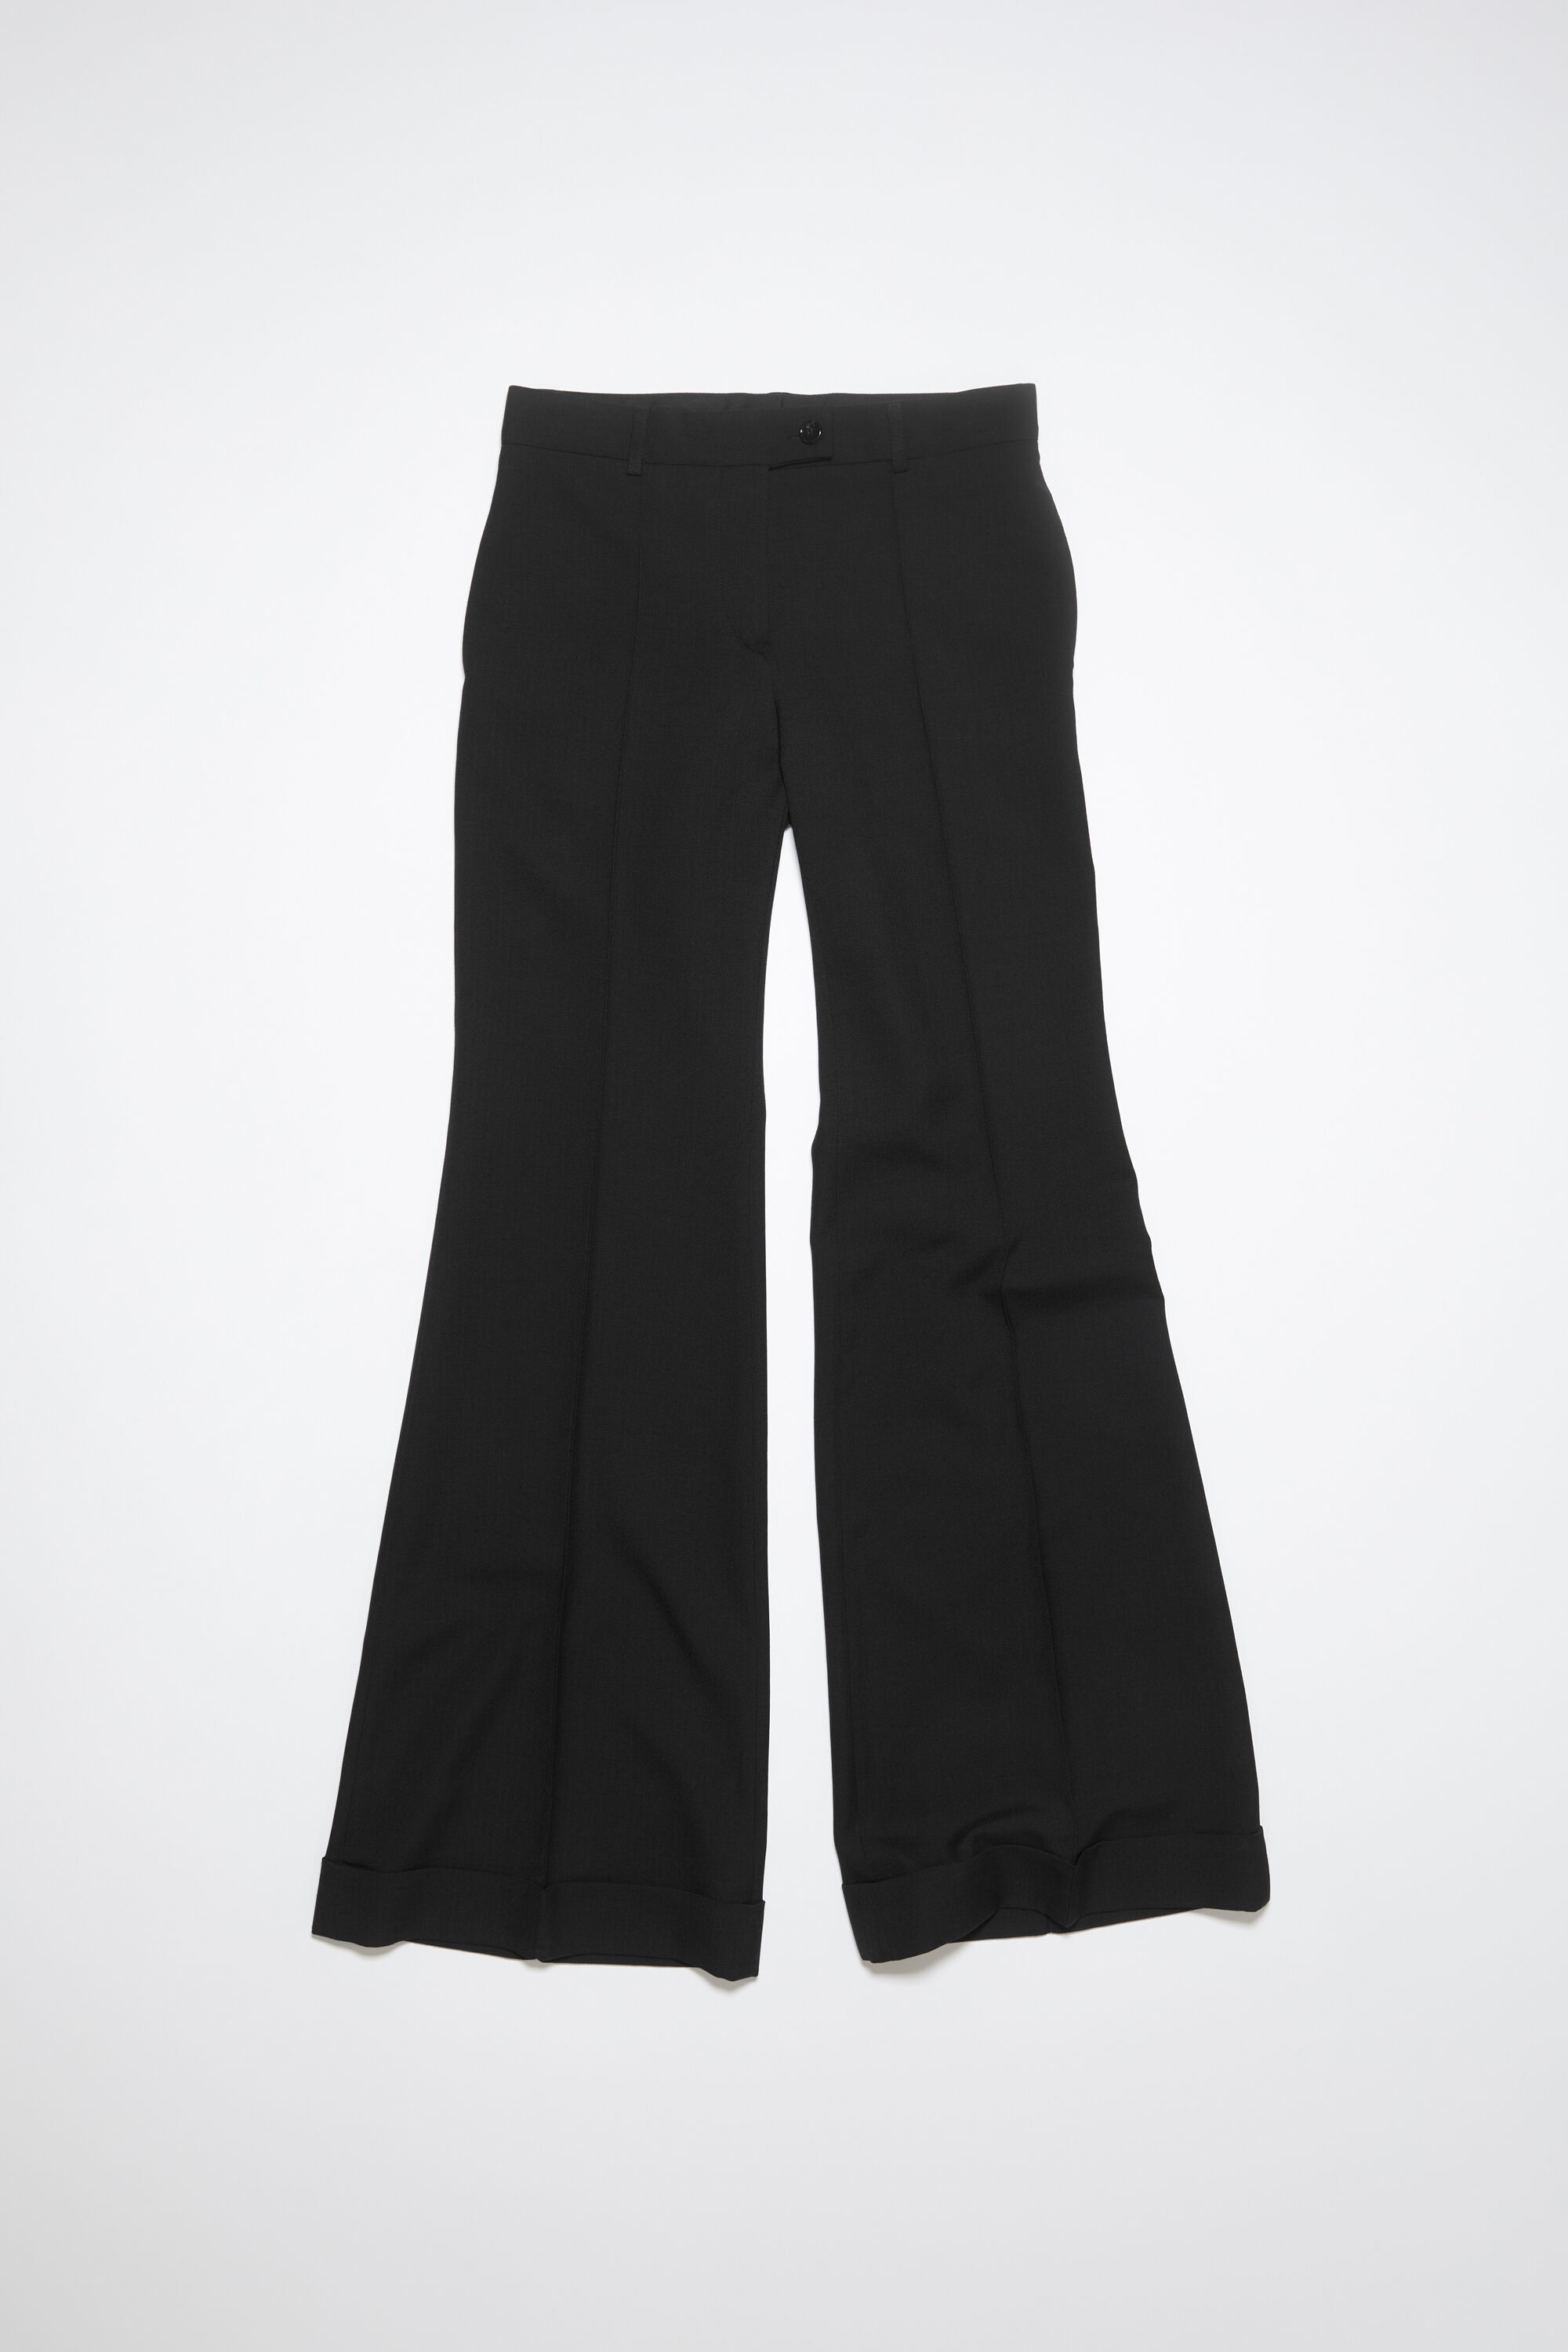 acne studios flare trousers